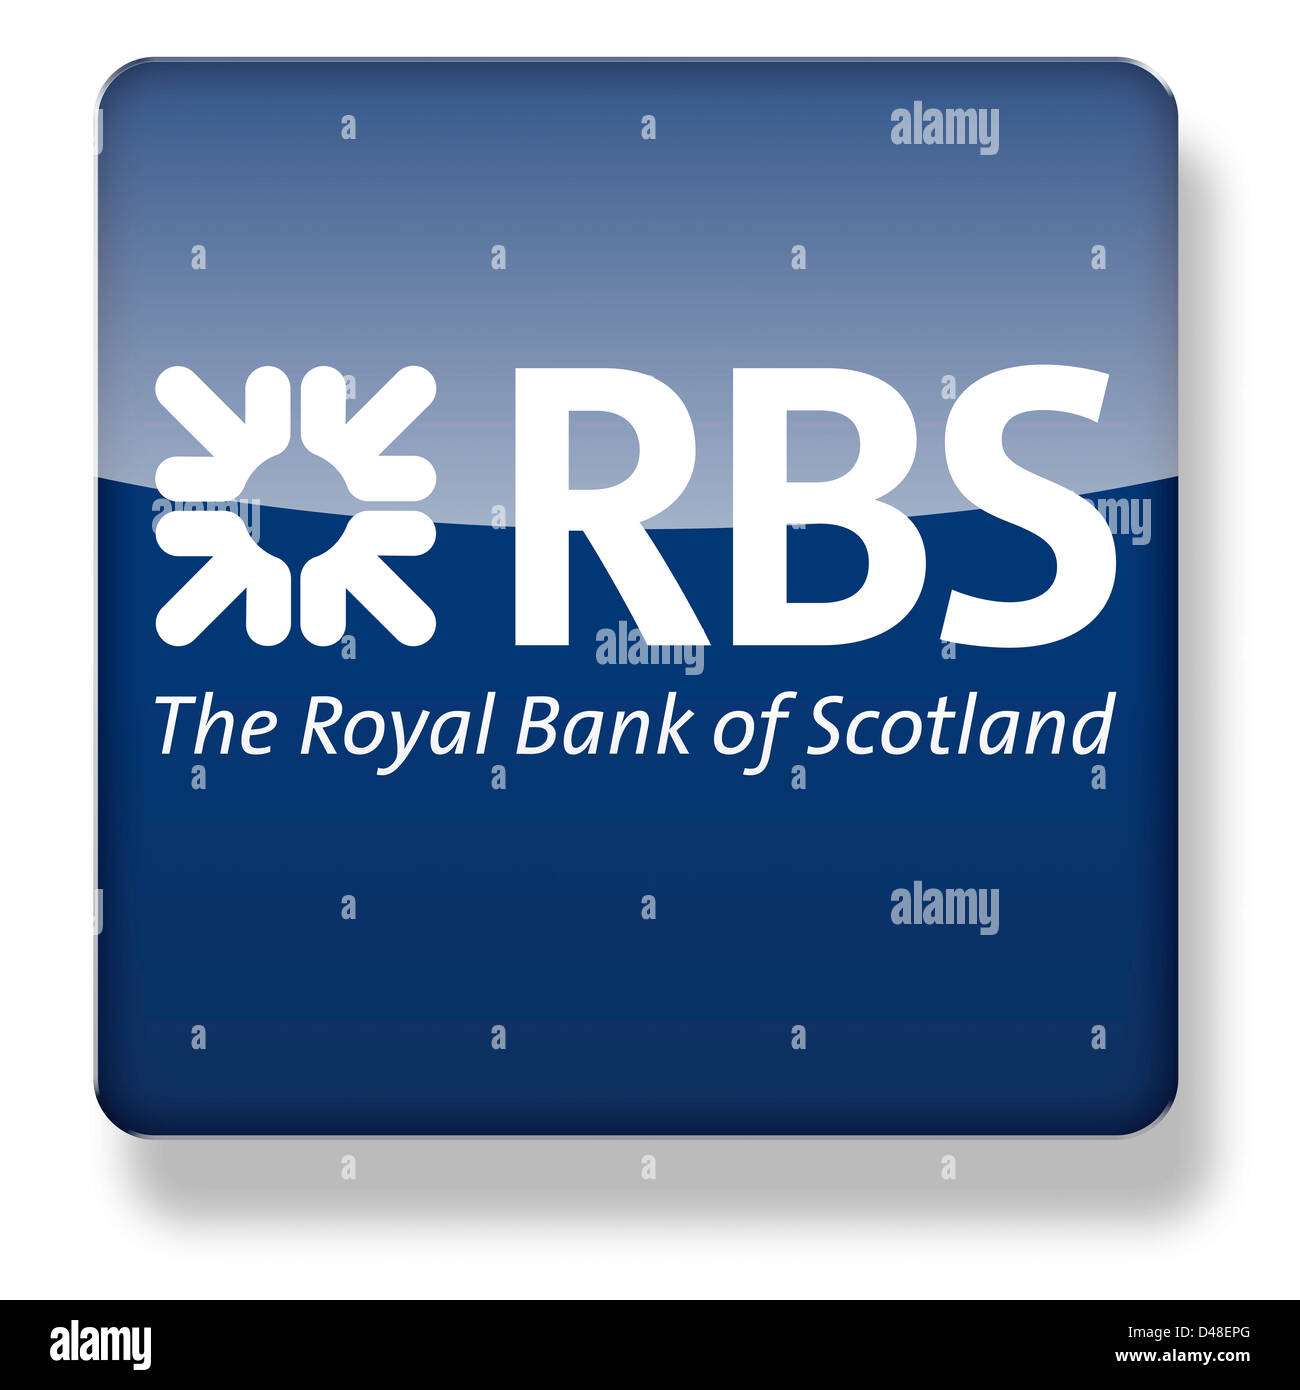 Royal Bank of Scotland logo as an app icon. Clipping path included. Stock Photo